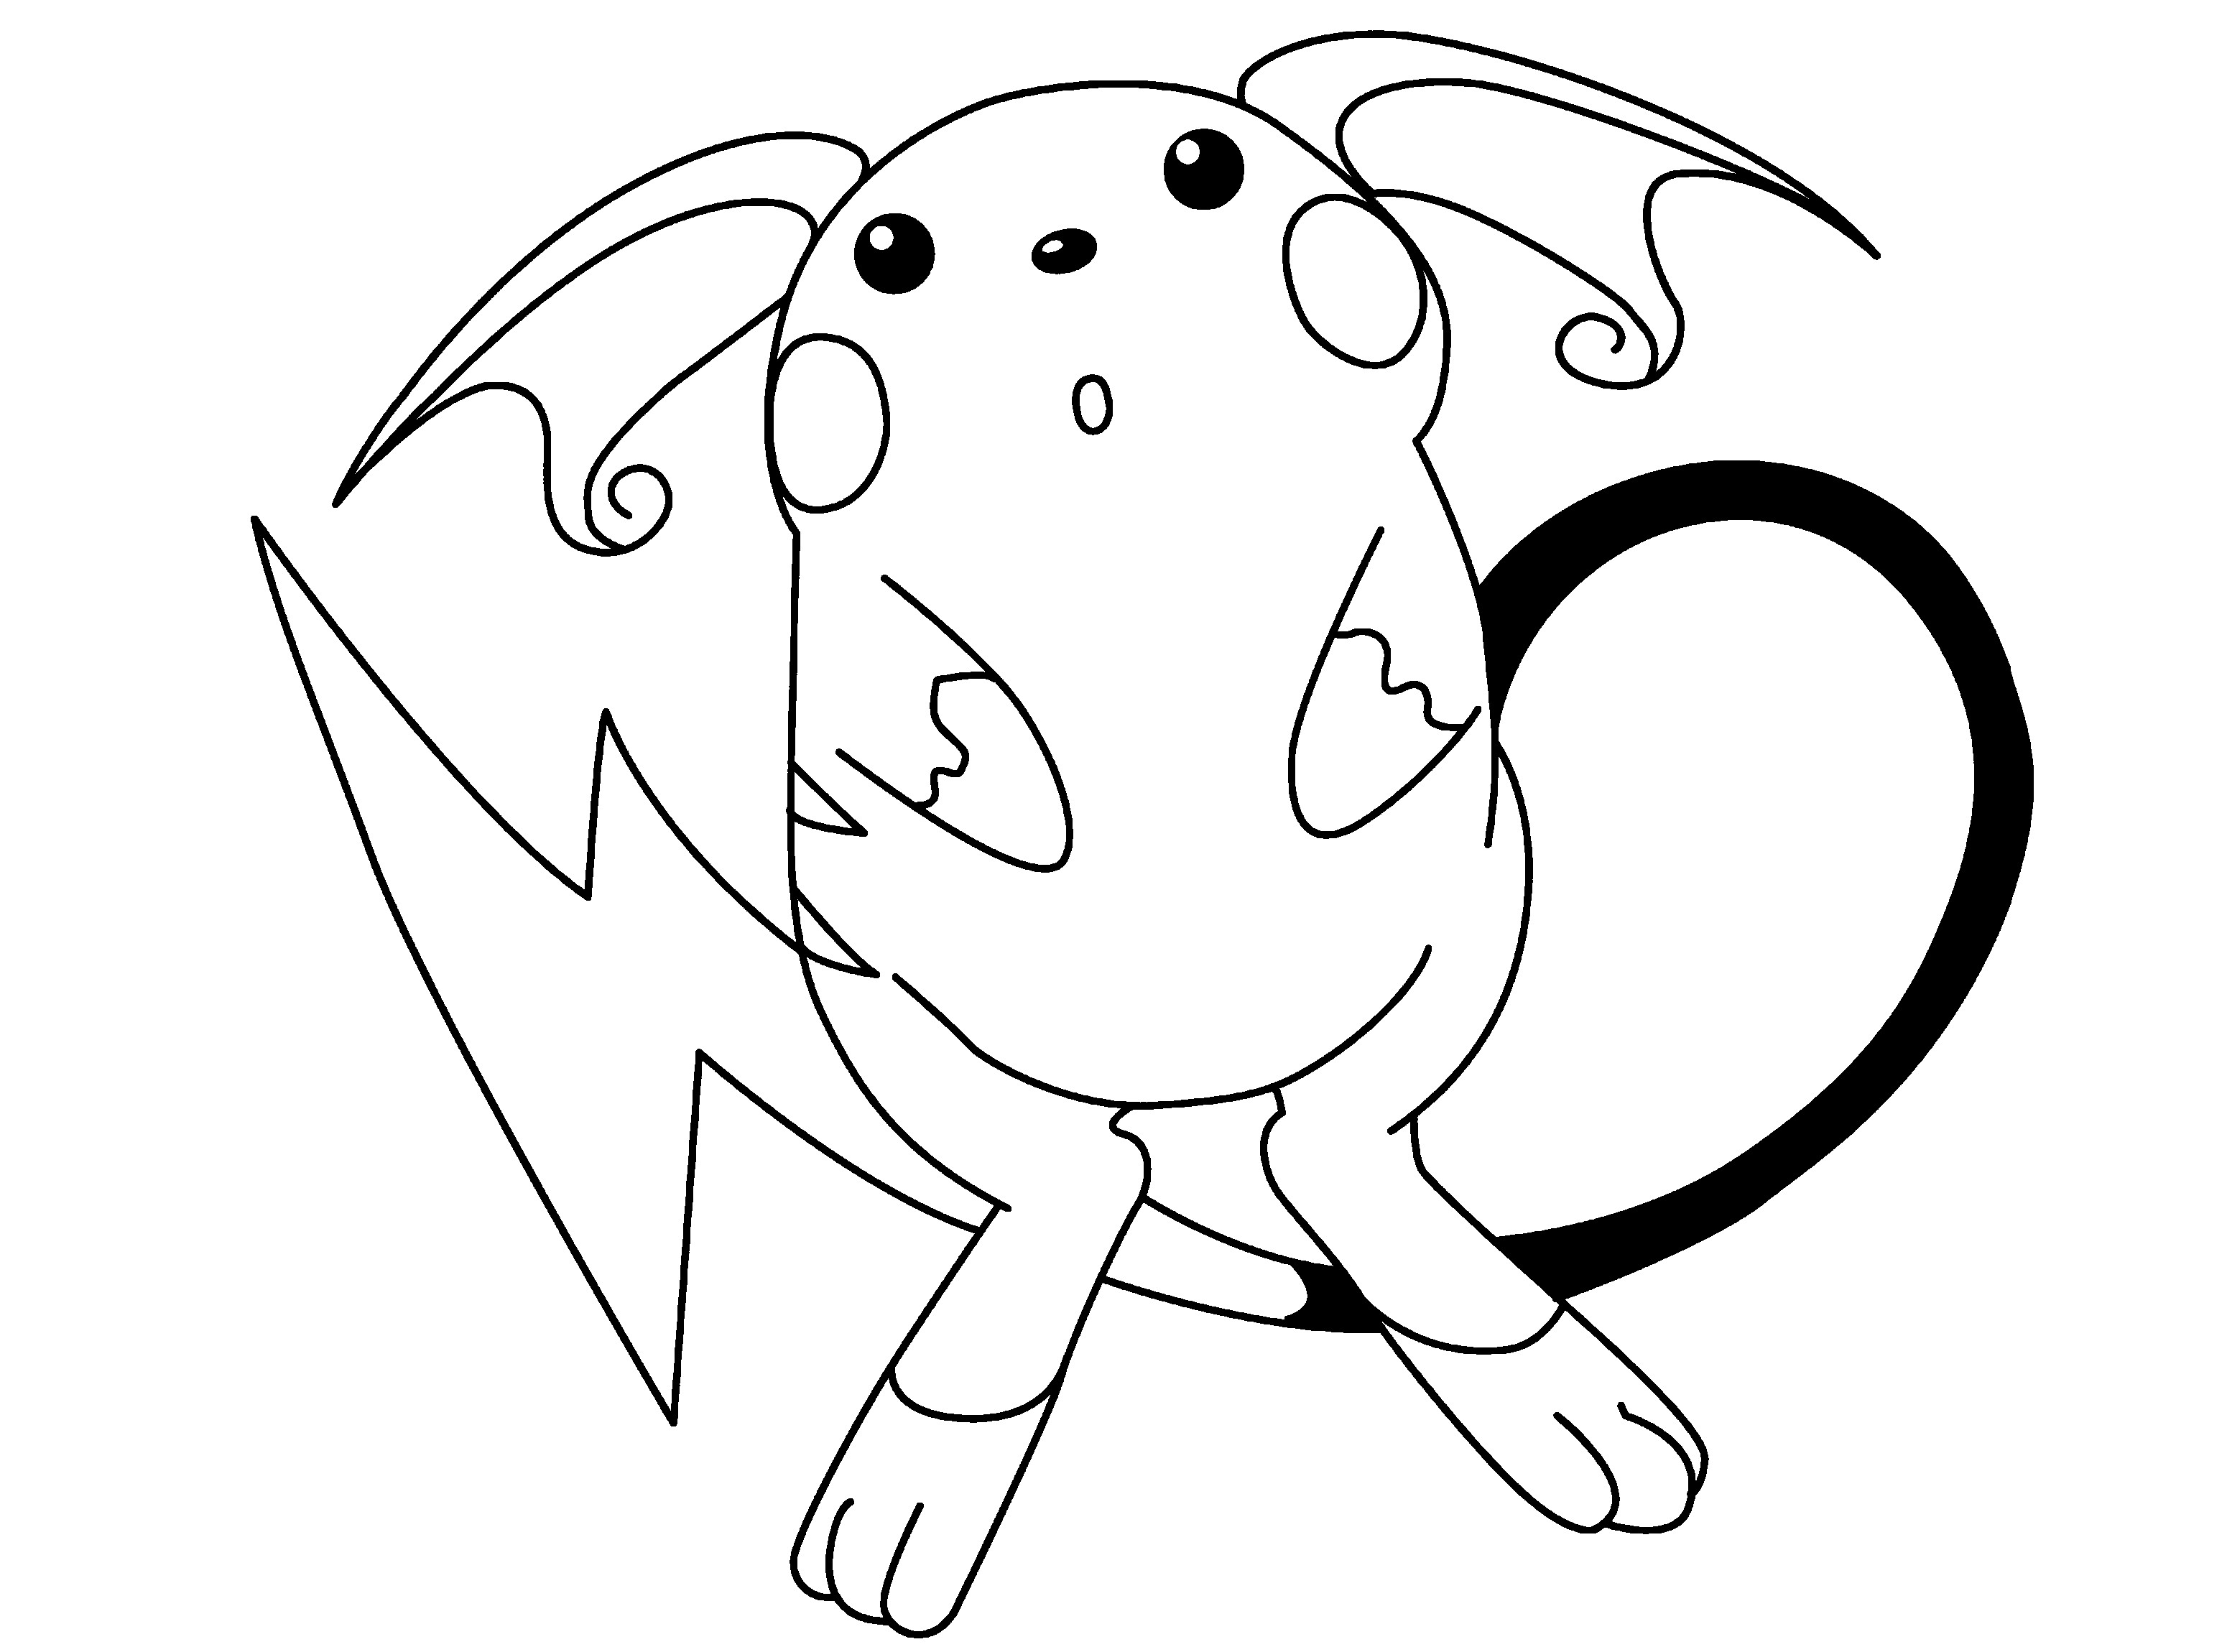 The 20 Best Ideas for Pokemon Printable Coloring Pages Best